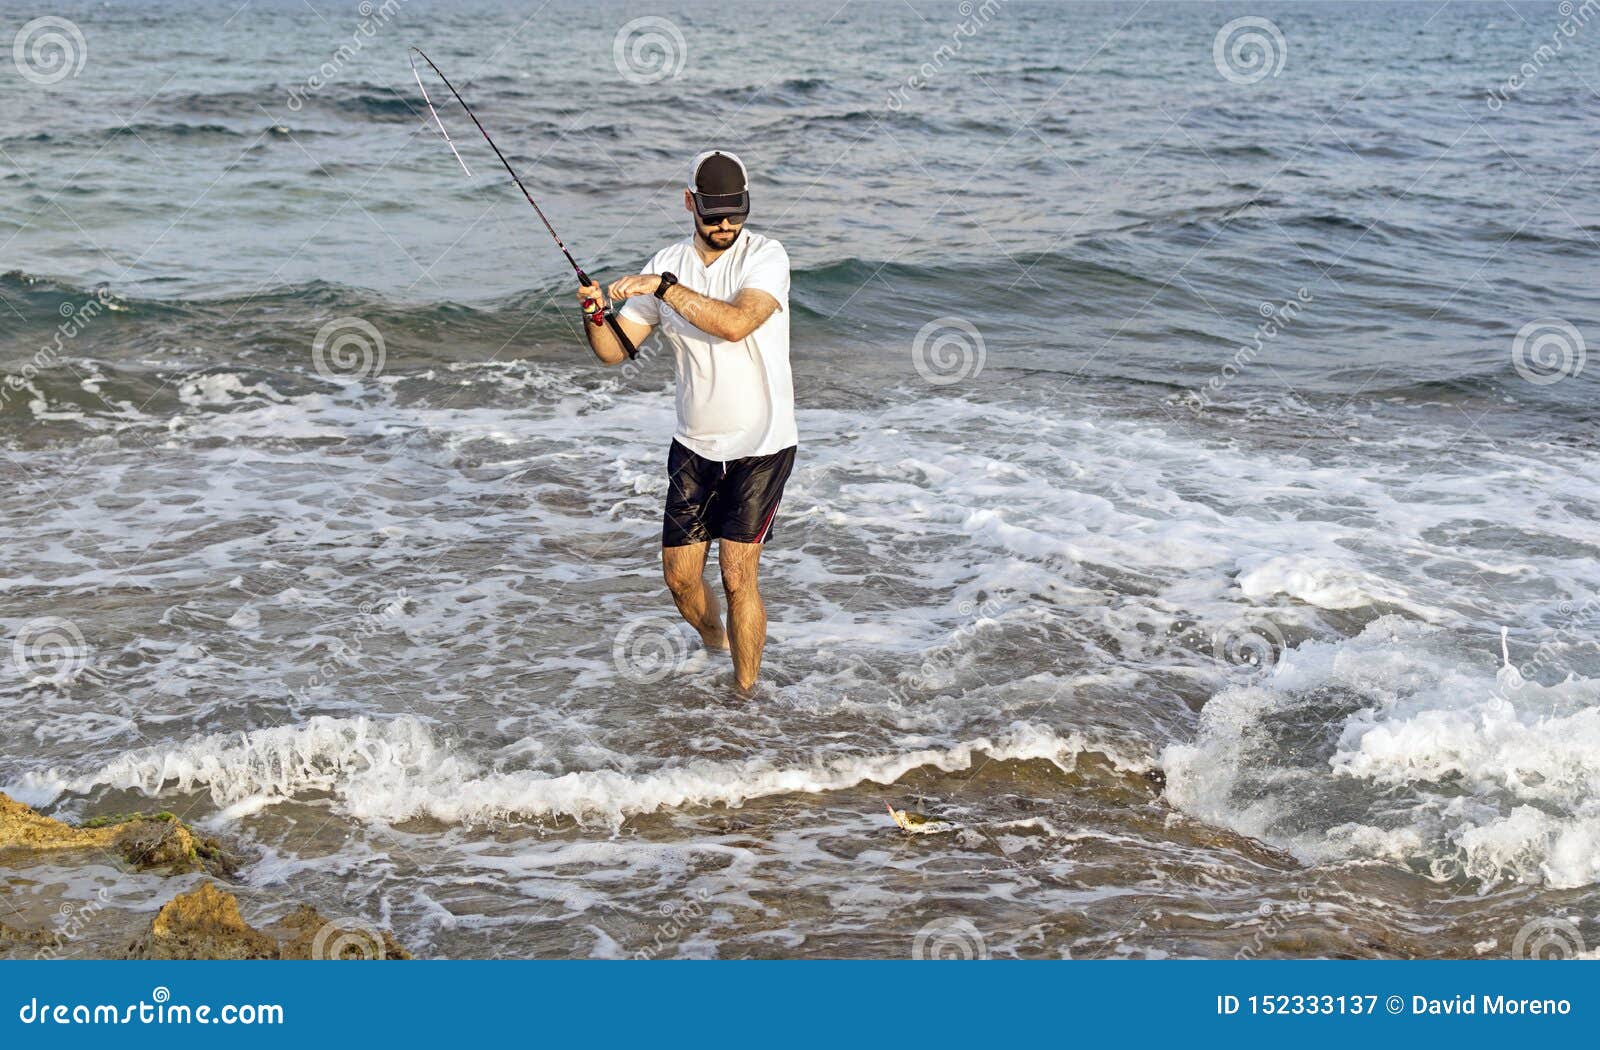 Fisherman Standing at the Seashore Hooks a Fish. Editorial Photography -  Image of beach, landscape: 152333137